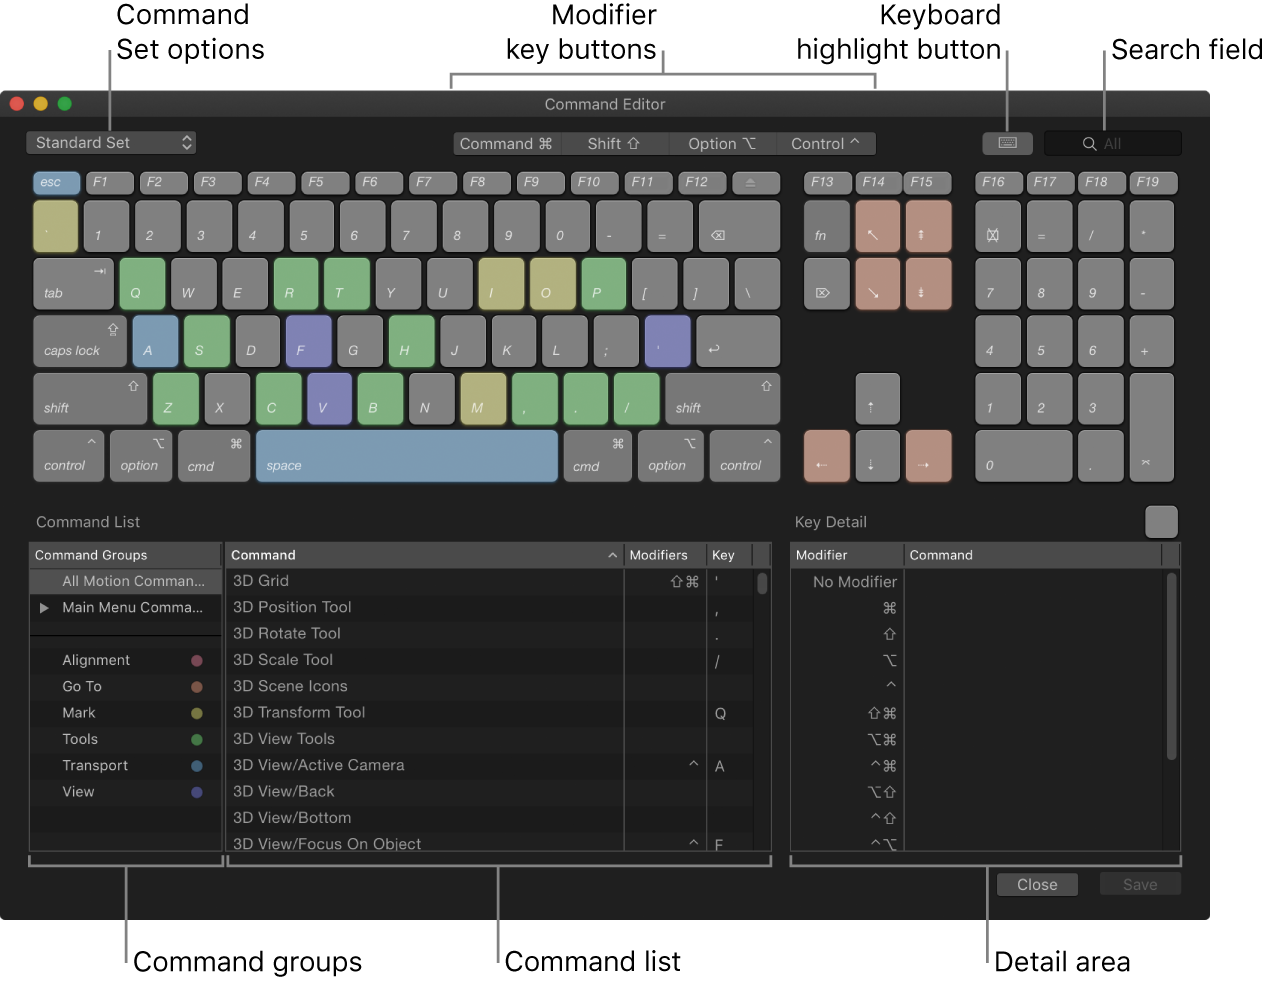 Command Editor showing Command Set options, modifier key buttons, keyboard highlight button, search field, Command groups, Command List, and Key Detail area